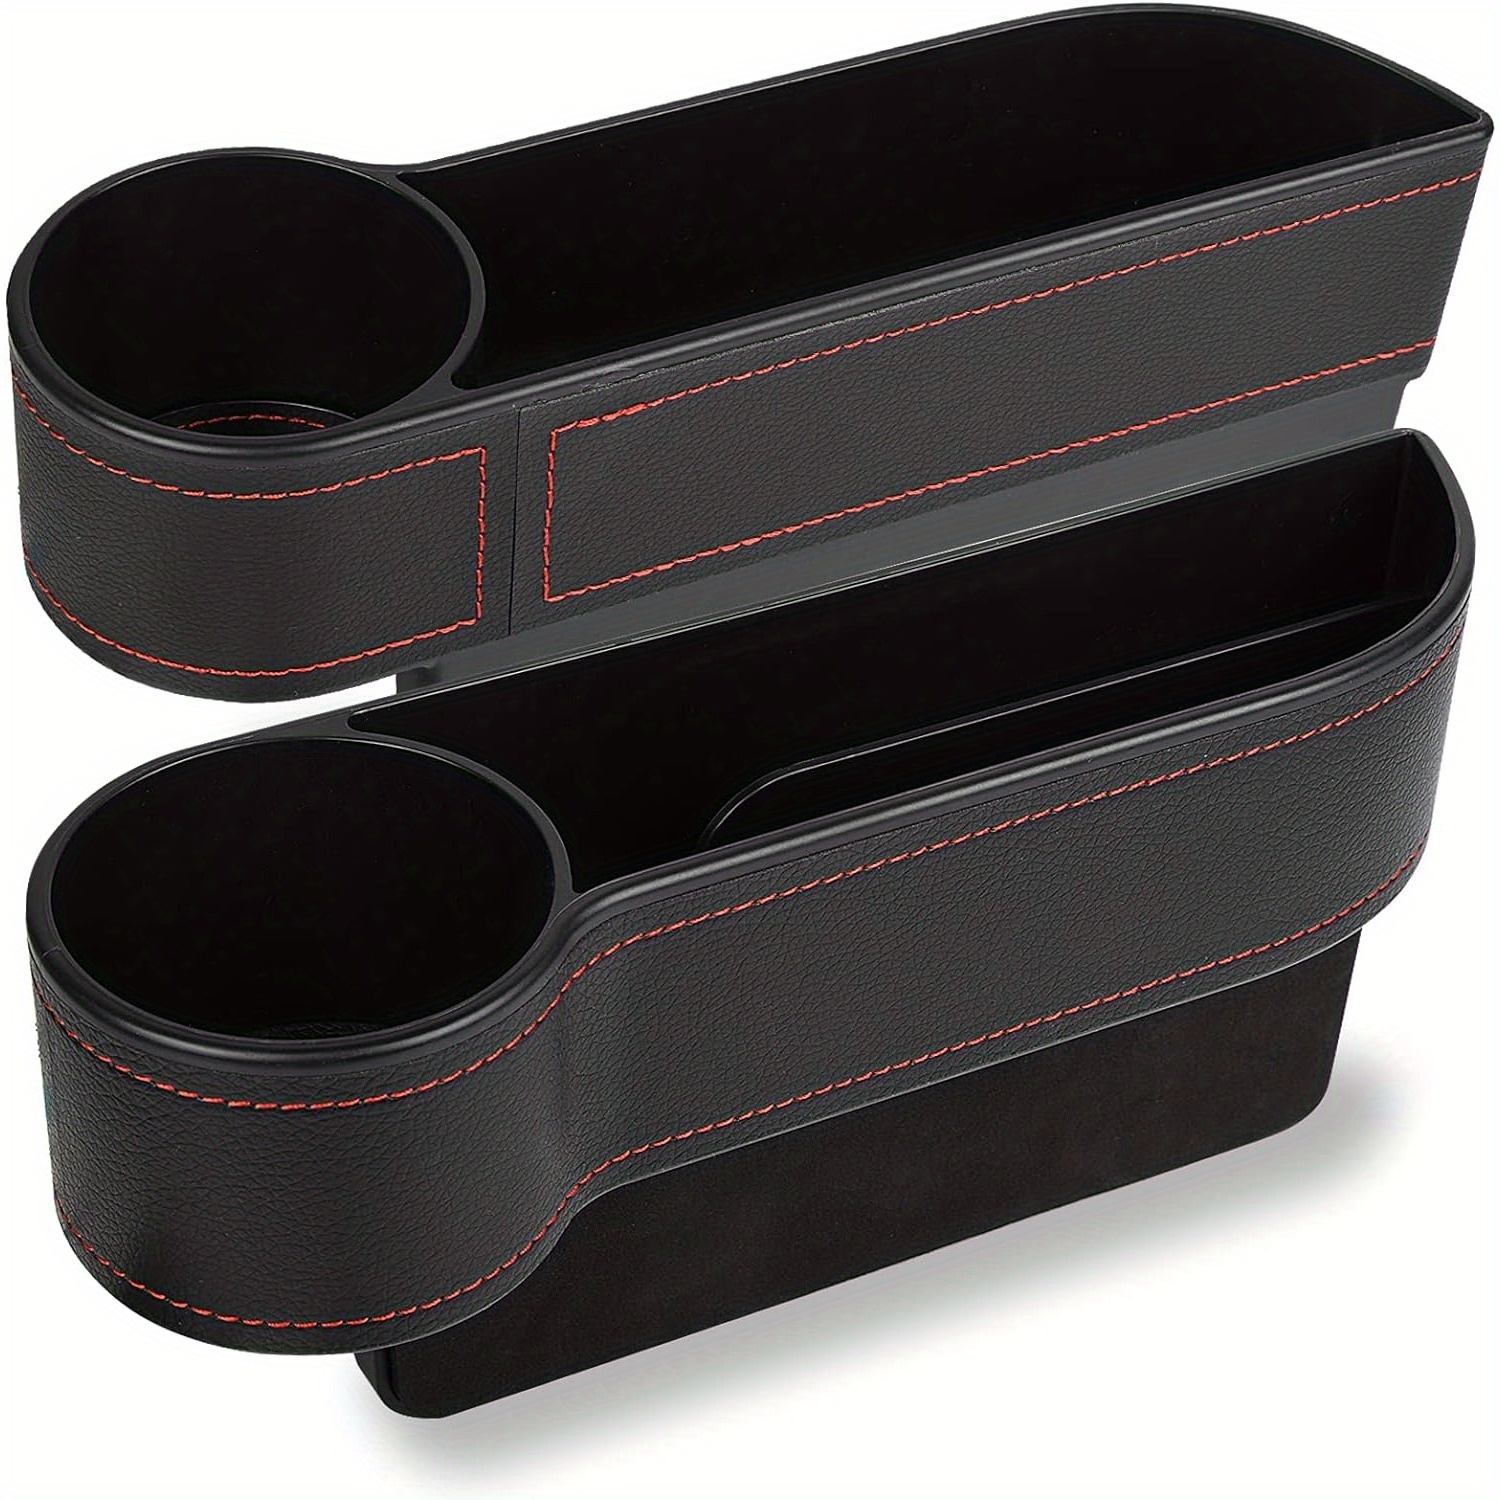 

2pcs Car Seat Gap Organizer With Cup Holder - Front Console Side Storage Boxes For Driver & Passenger Sides Seat Gap Storage For Car Car Armrest Storage Box